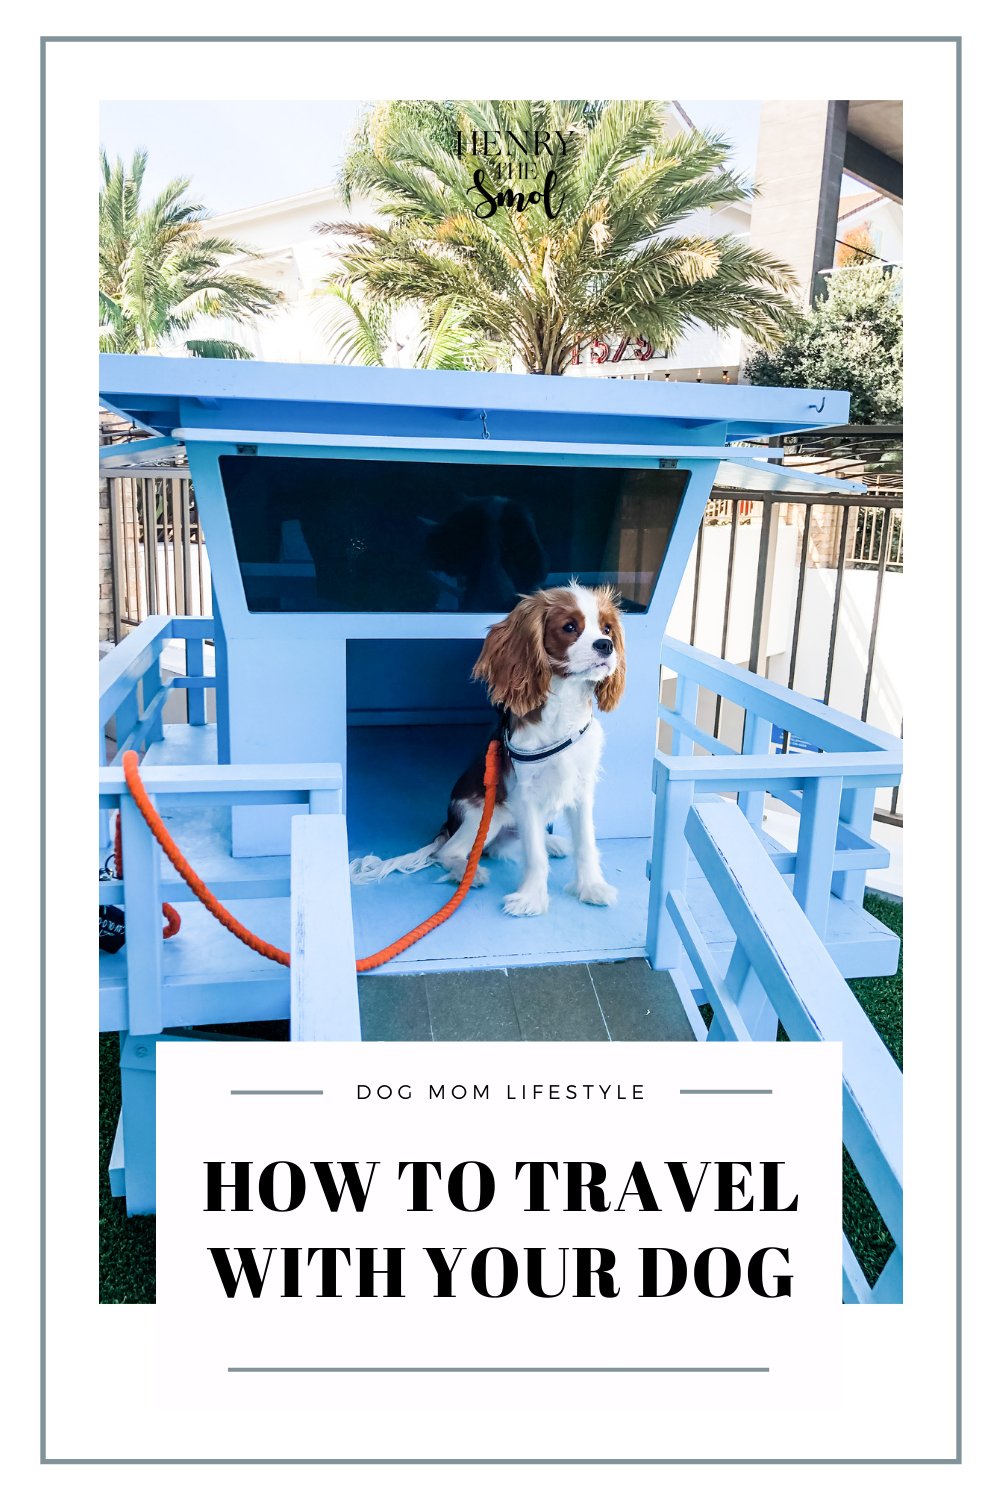 Tips for Traveling With Your Dog For The First Time